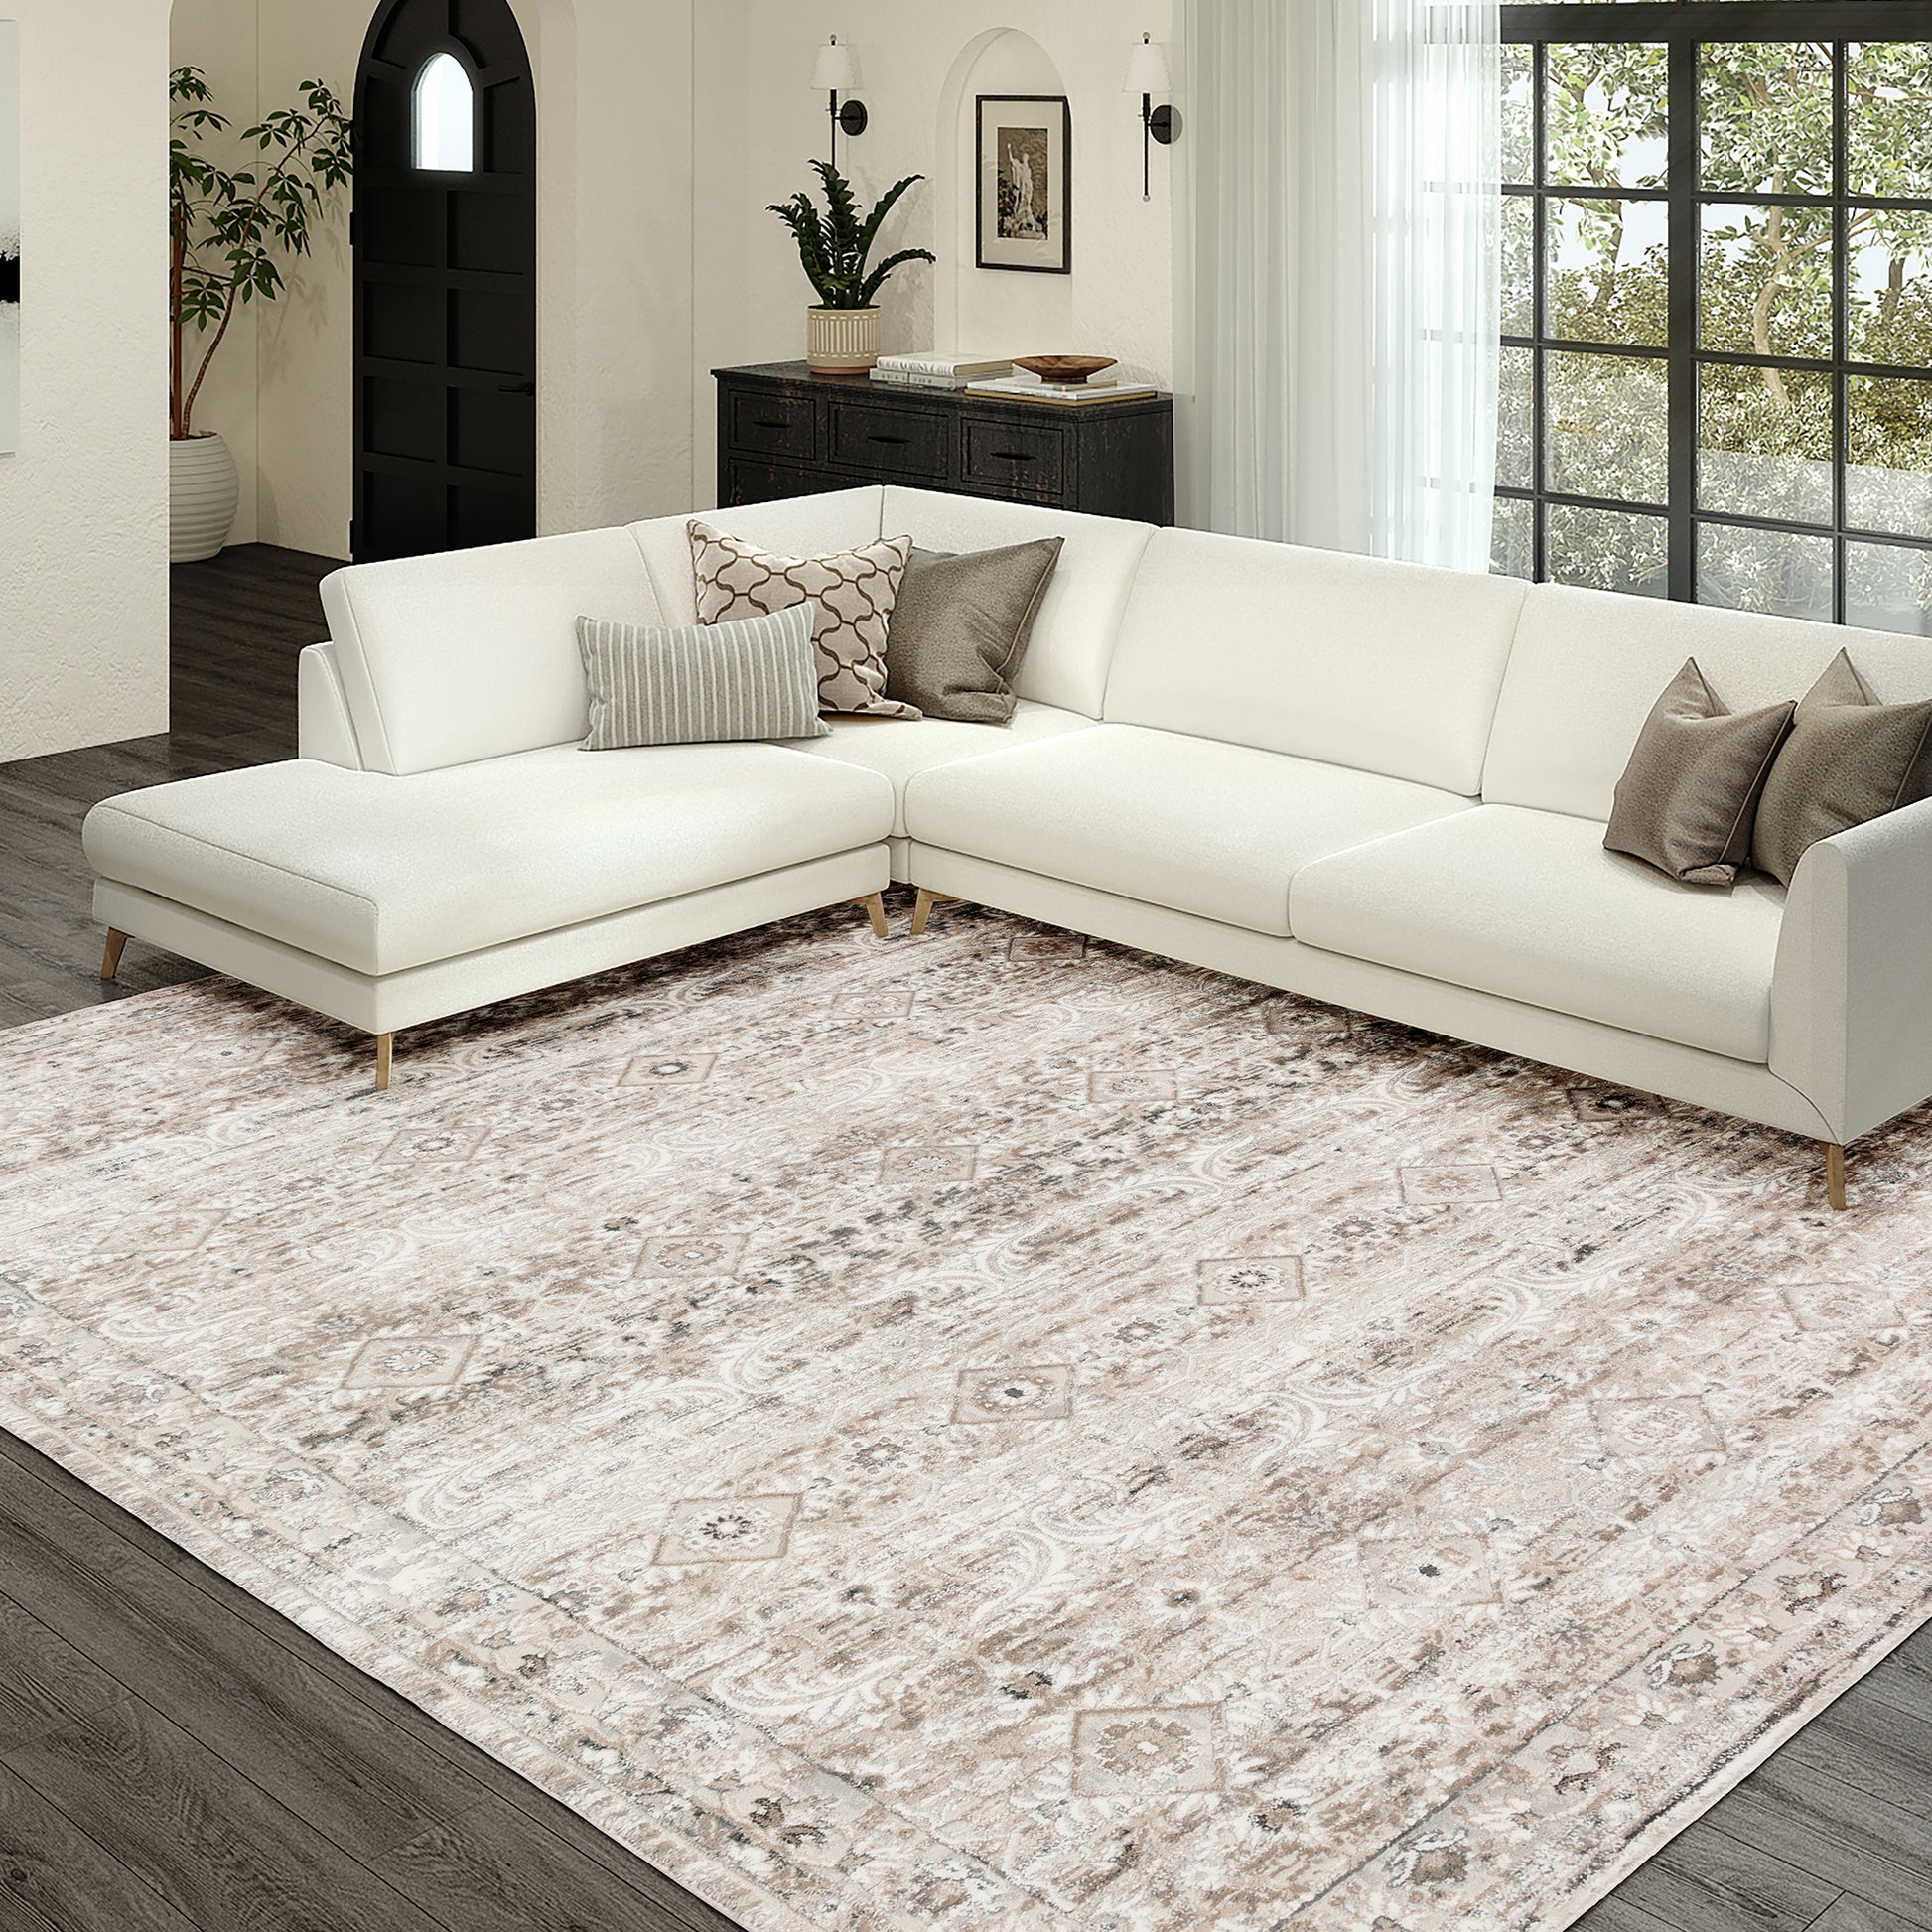 Dalyn Rhodes Rr7 Taupe Area Rug